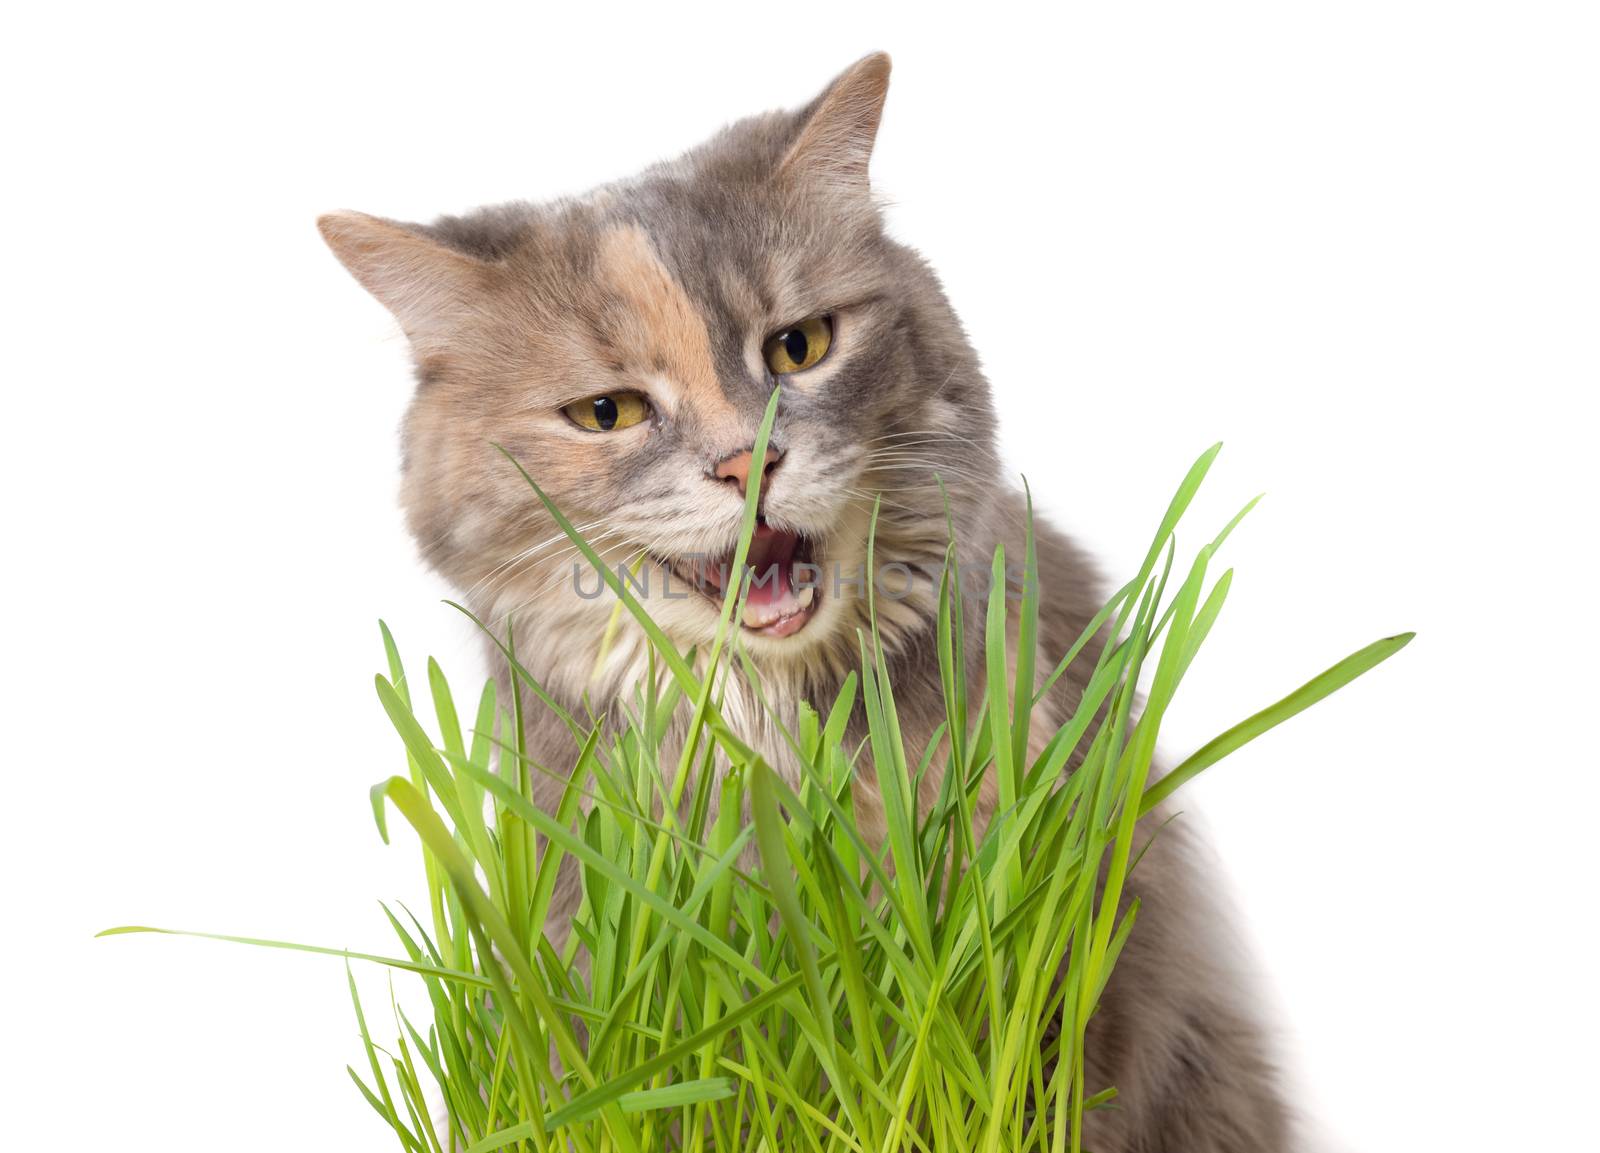 Calico cat eating cat grass by mbruxelle